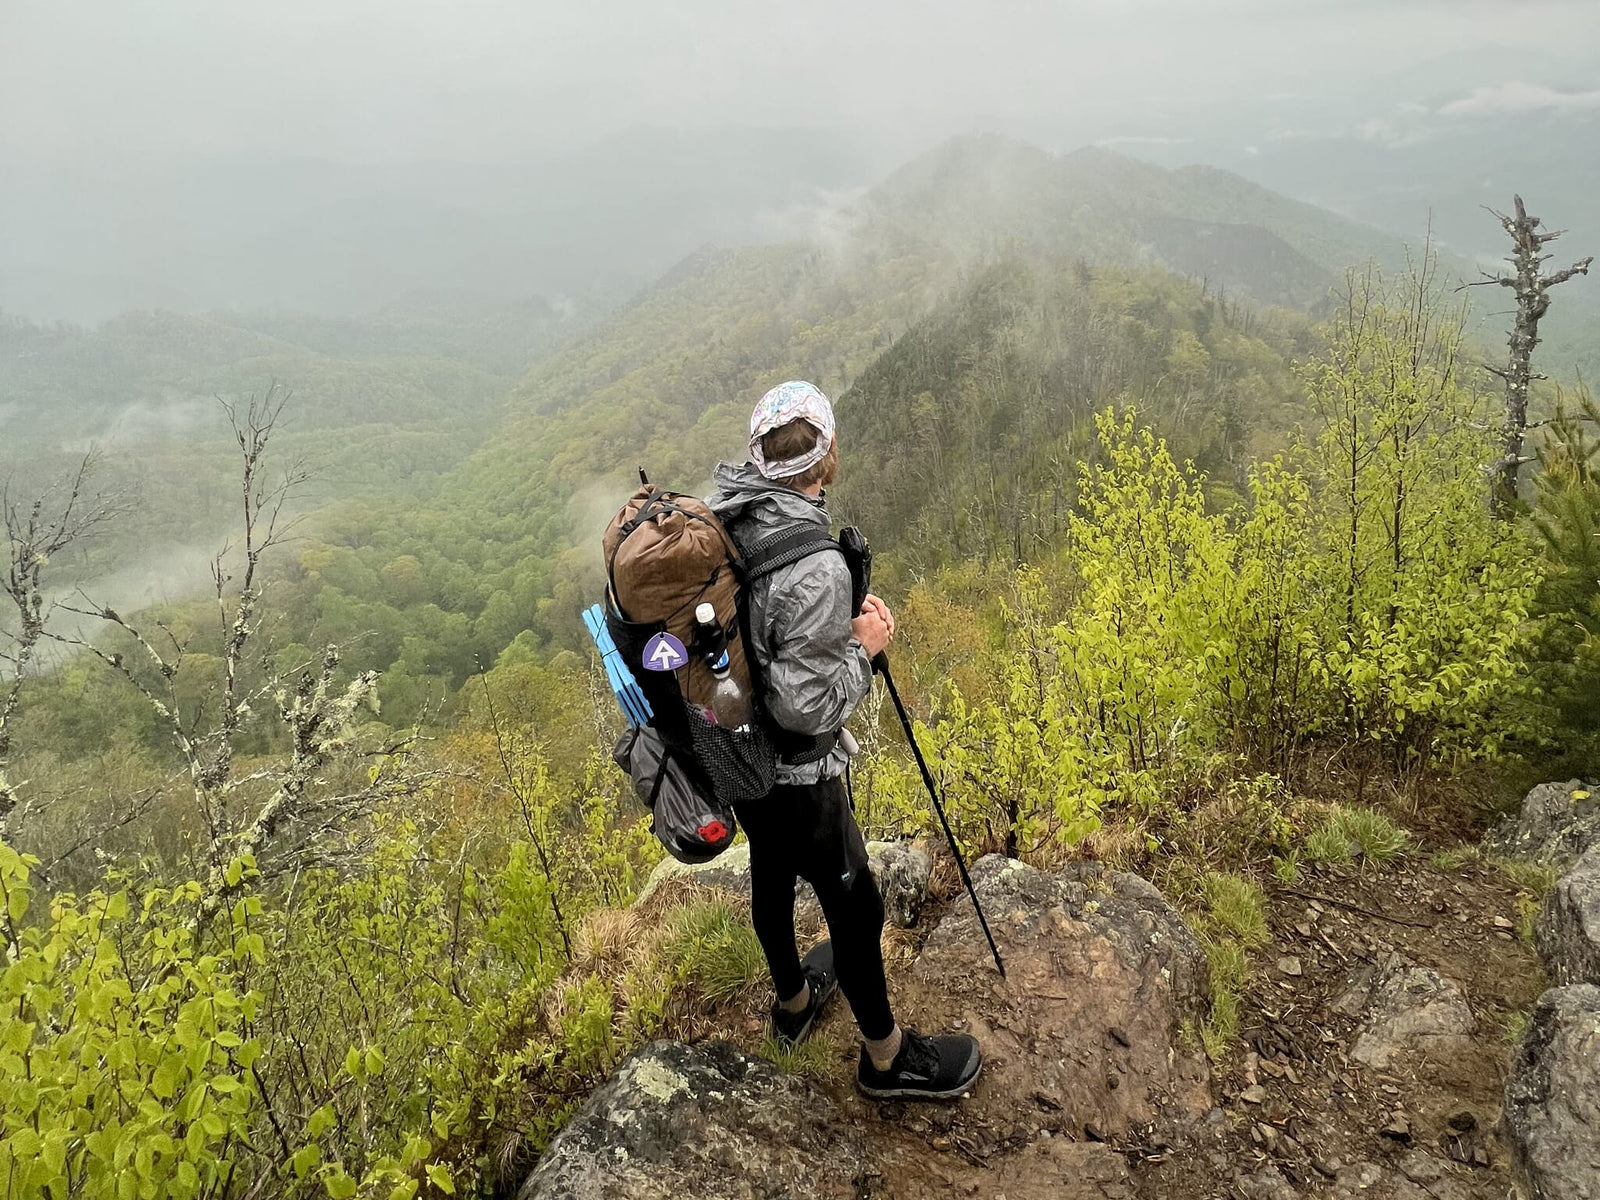 How to Keep Your Gear Dry While Hiking in Rain - Outdoor Tech Blog